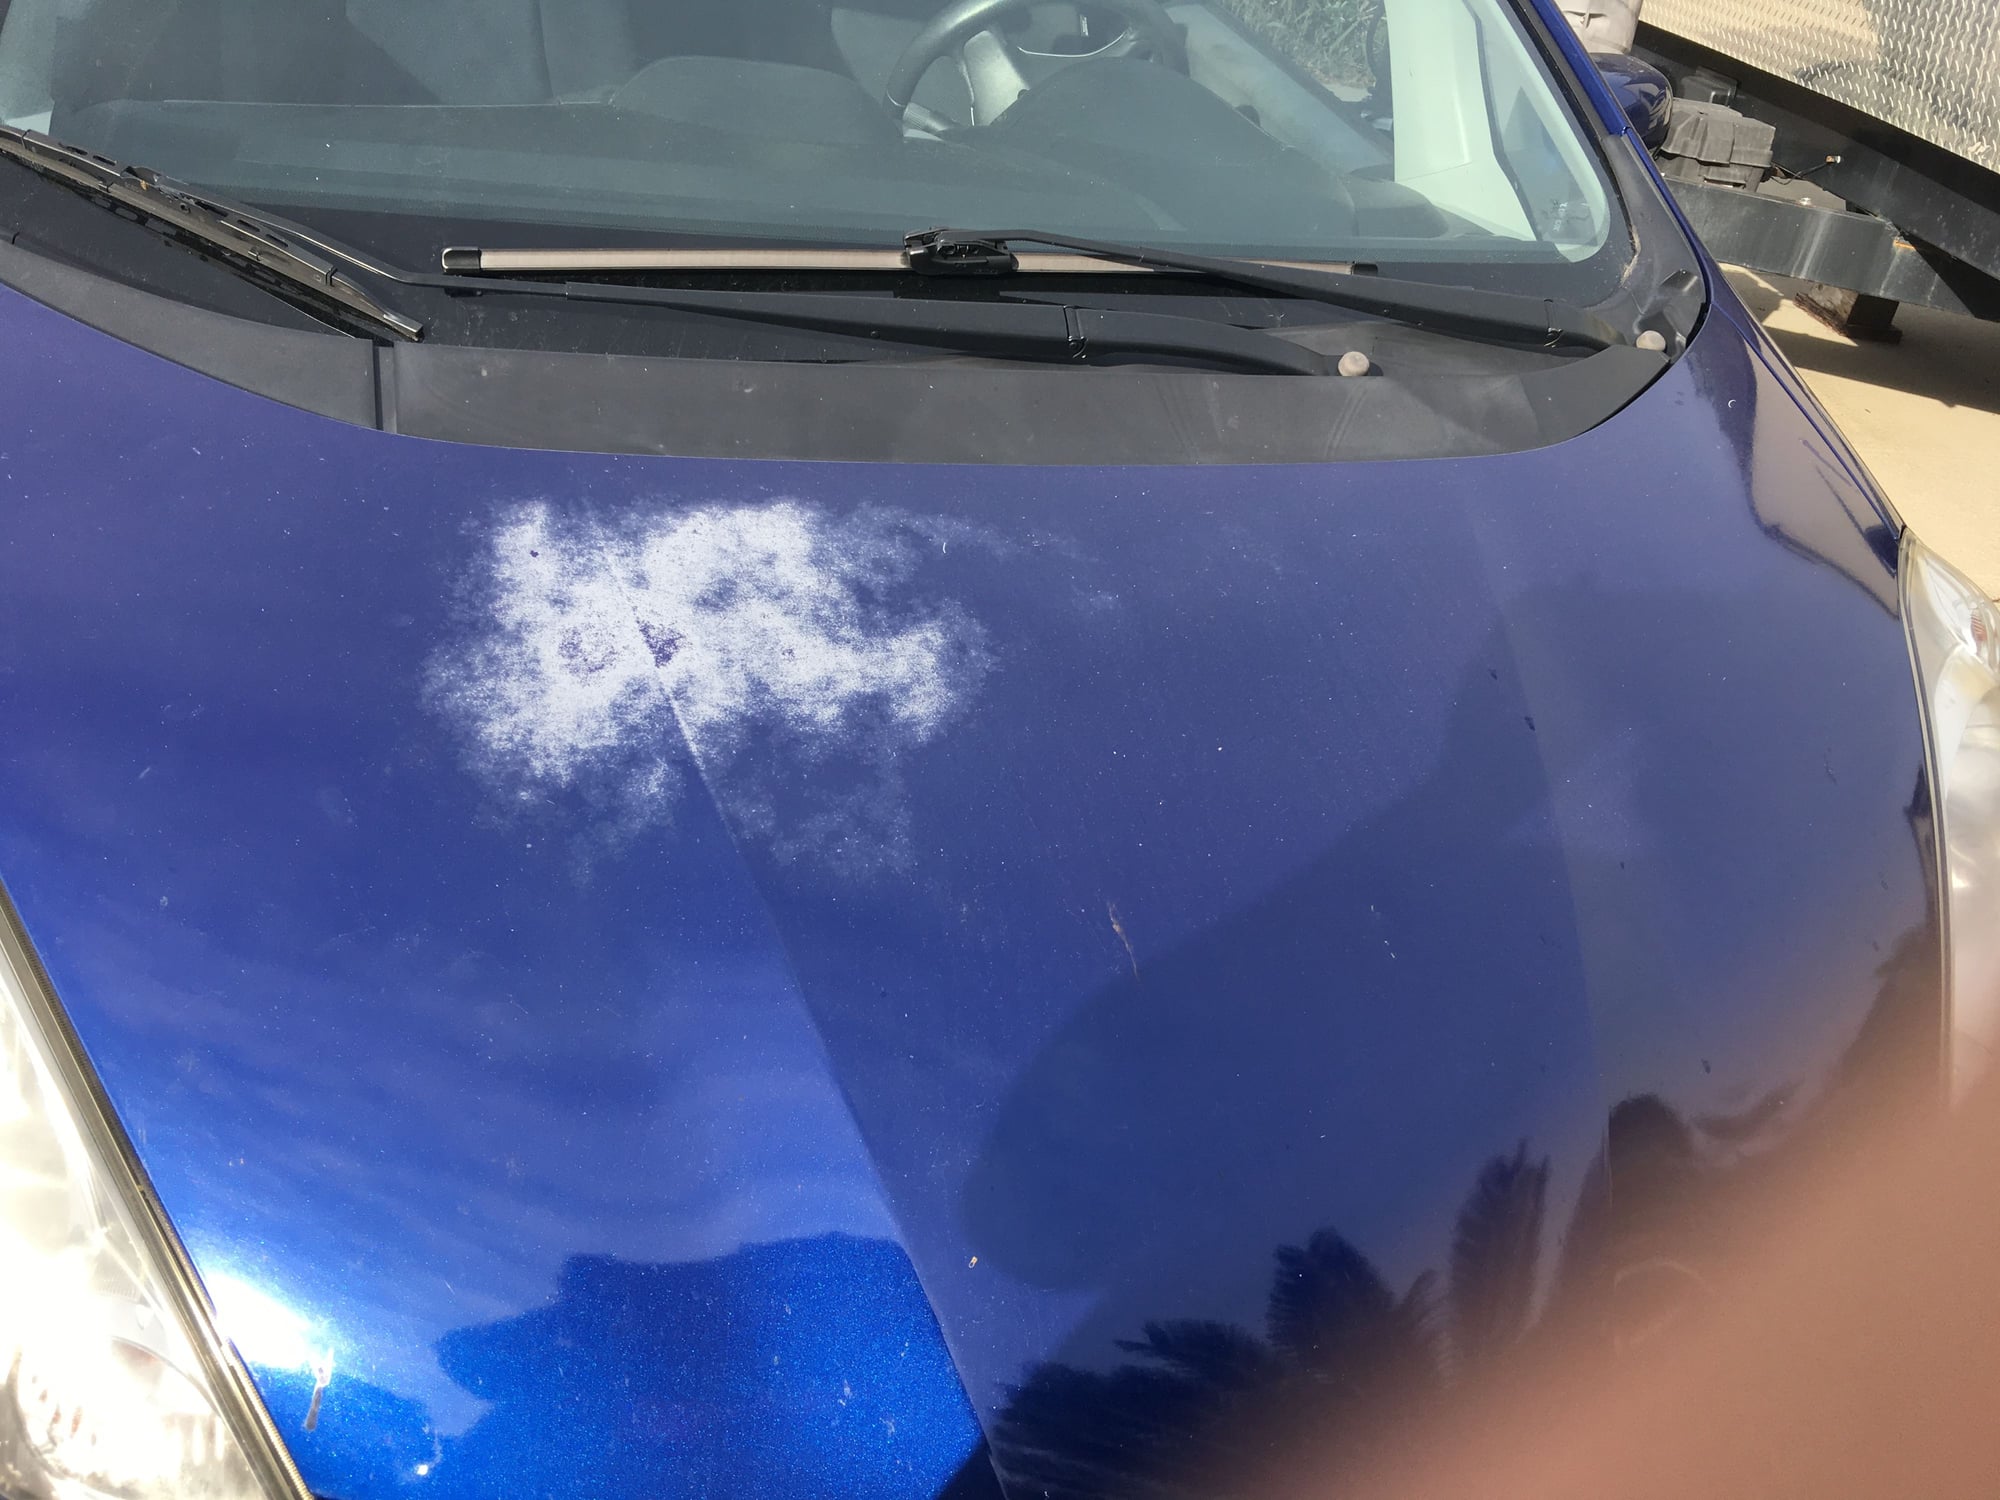 Paint/Clear Coat fading on blue '09 Fit - Unofficial Honda FIT Forums